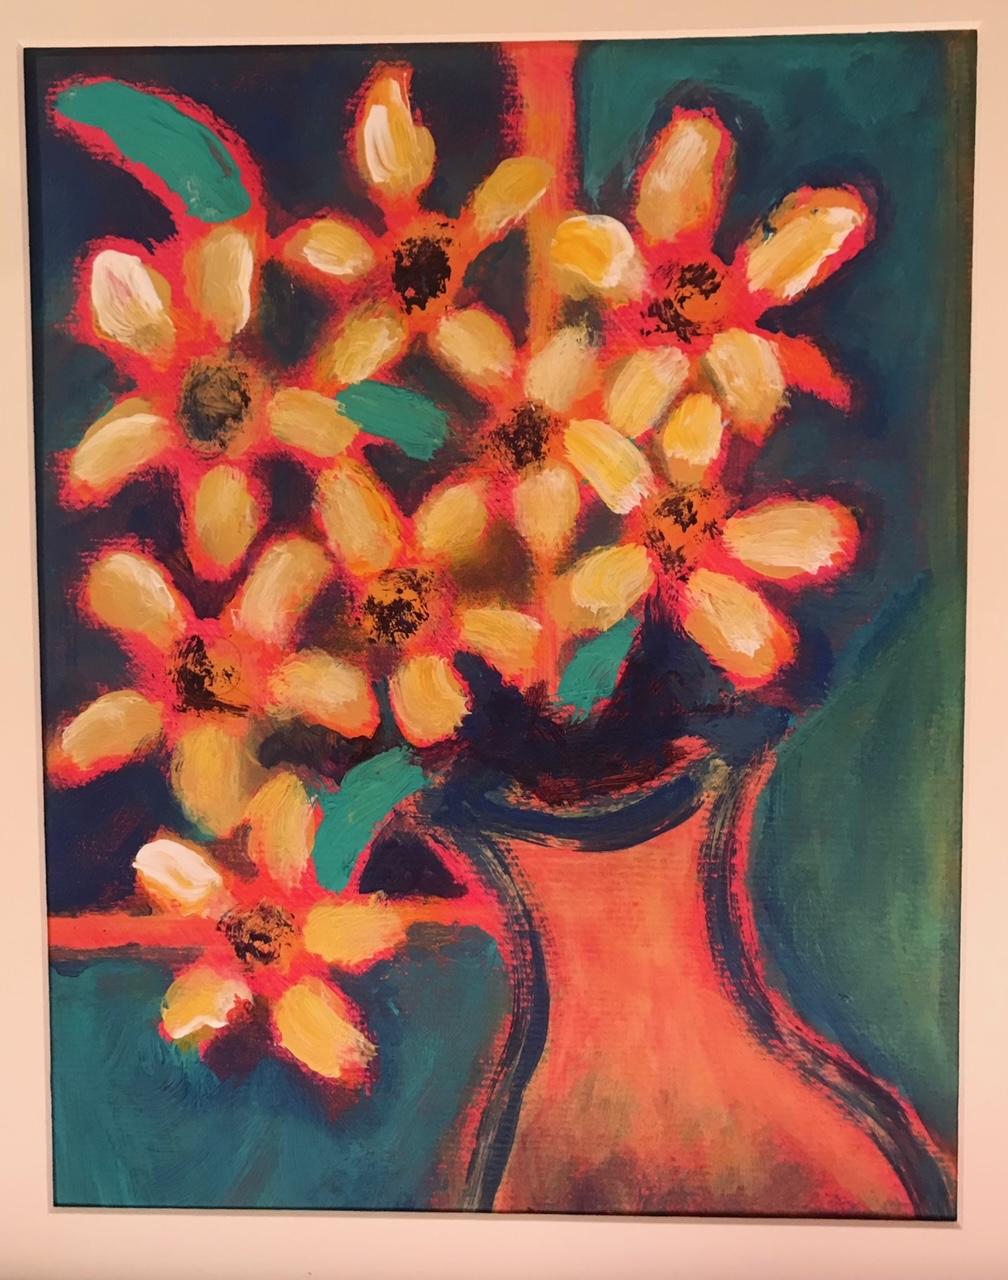 "Flowers in Vase 2021" by David Hall - Acrylic